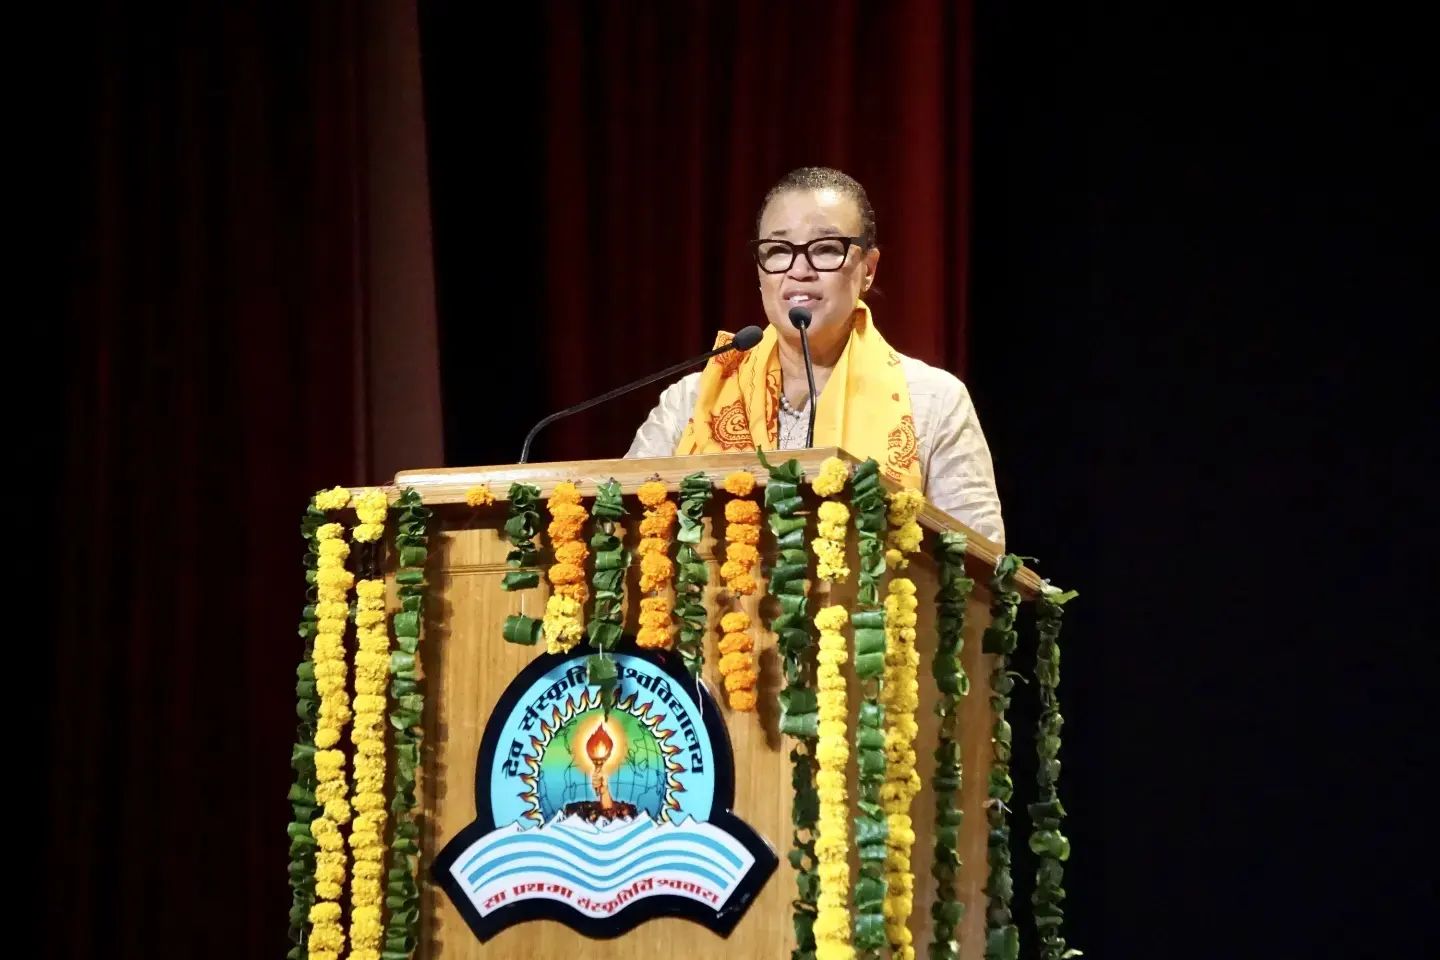 The Secretary General of the Commonwealth Nations, Ms Baroness Patricia, arrived at the Shantikunj Golden Jubilee Lecture Series on the university campus